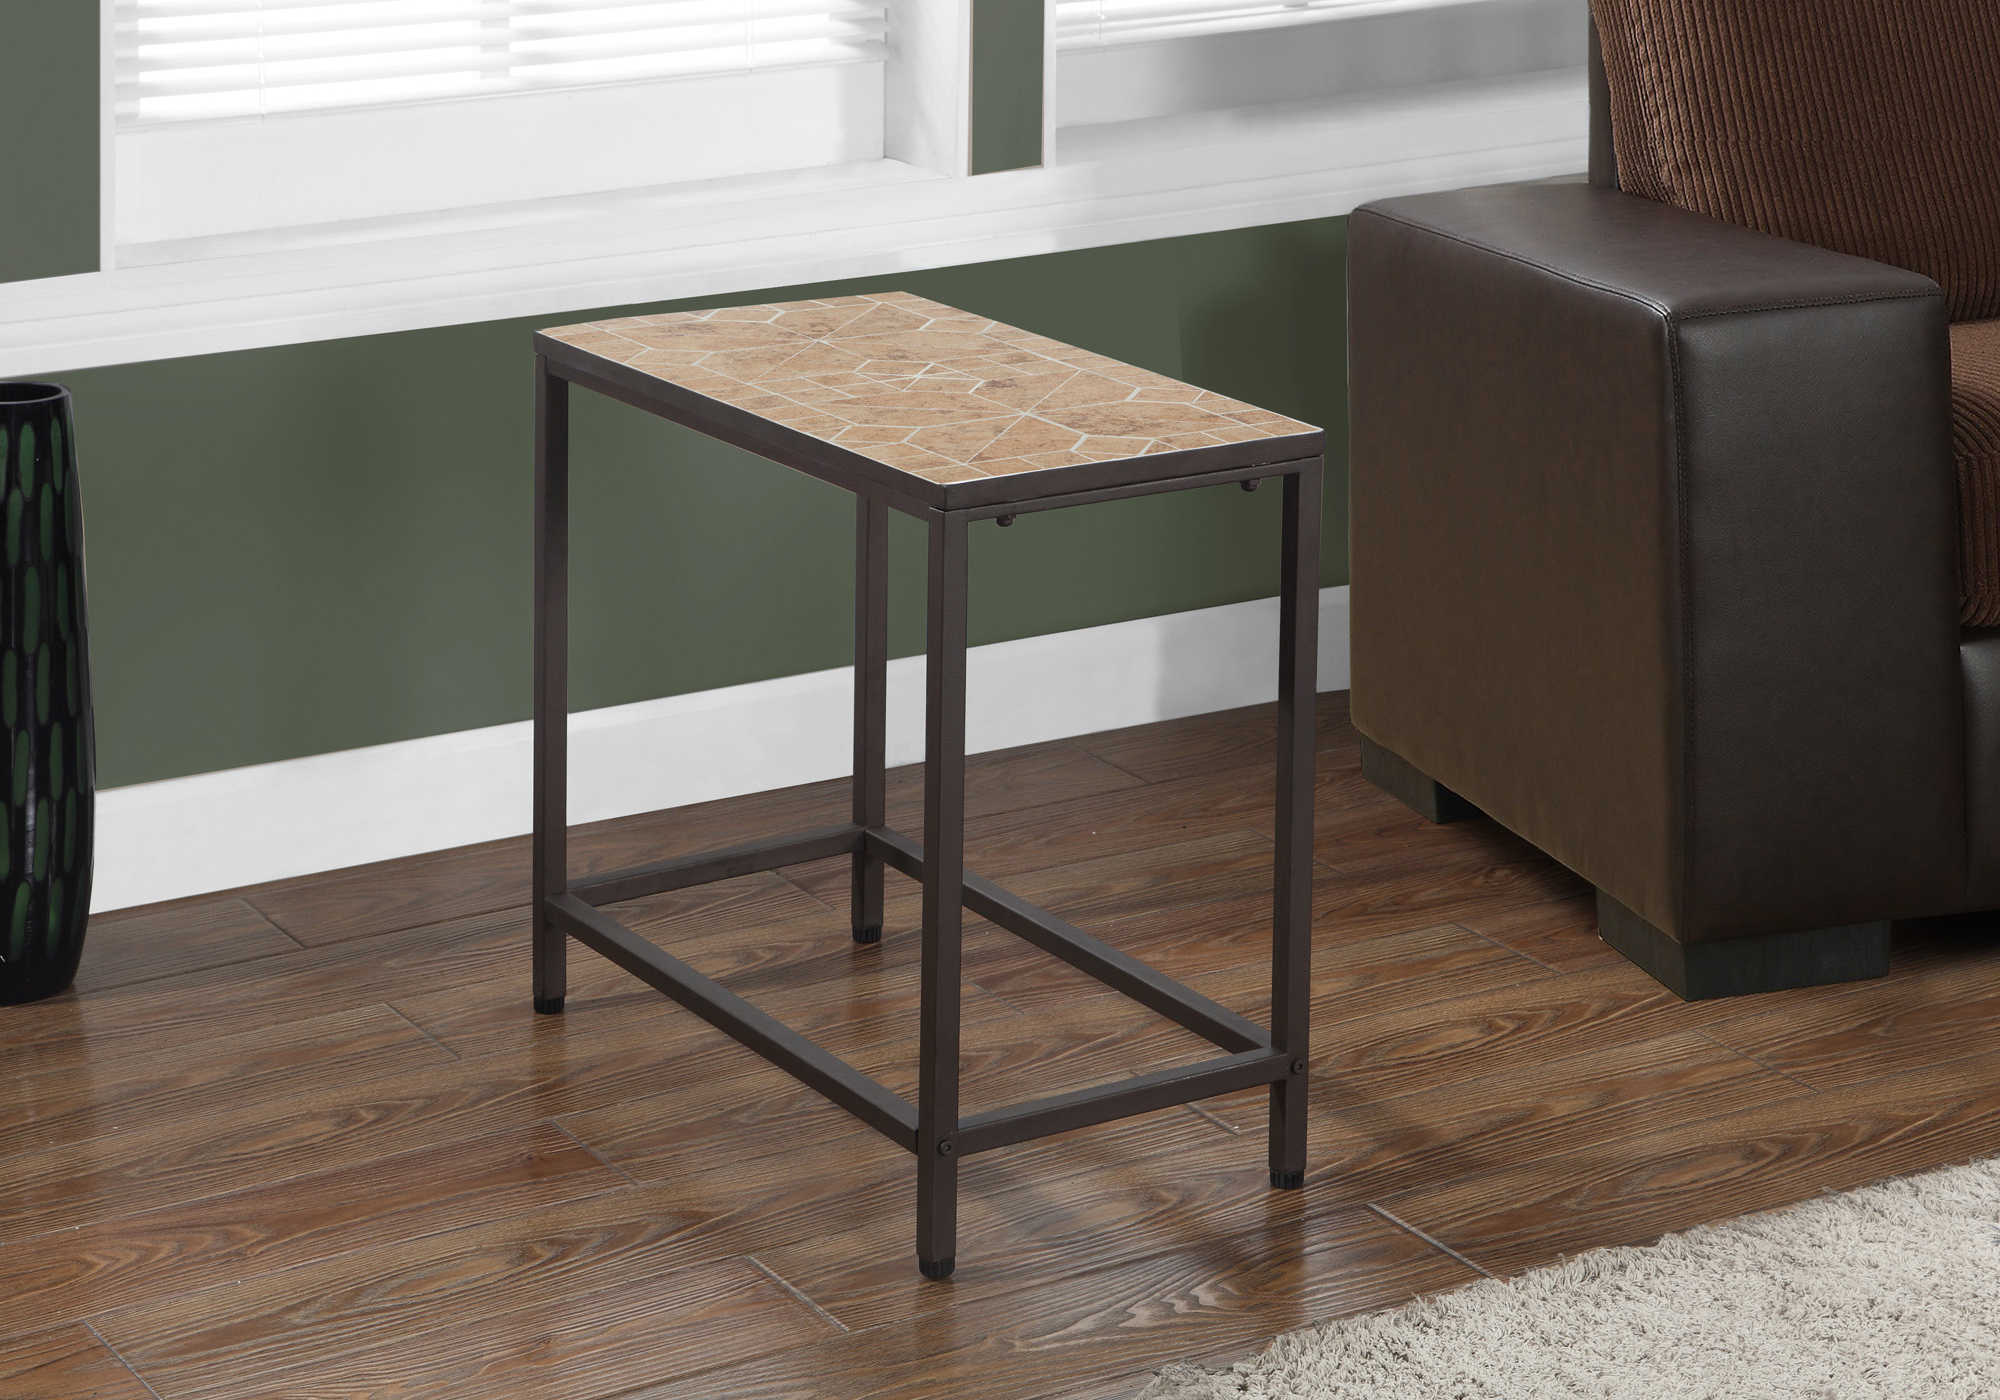 ACCENT TABLE - TERRACOTTA TILE TOP / HAMMERED BROWN 